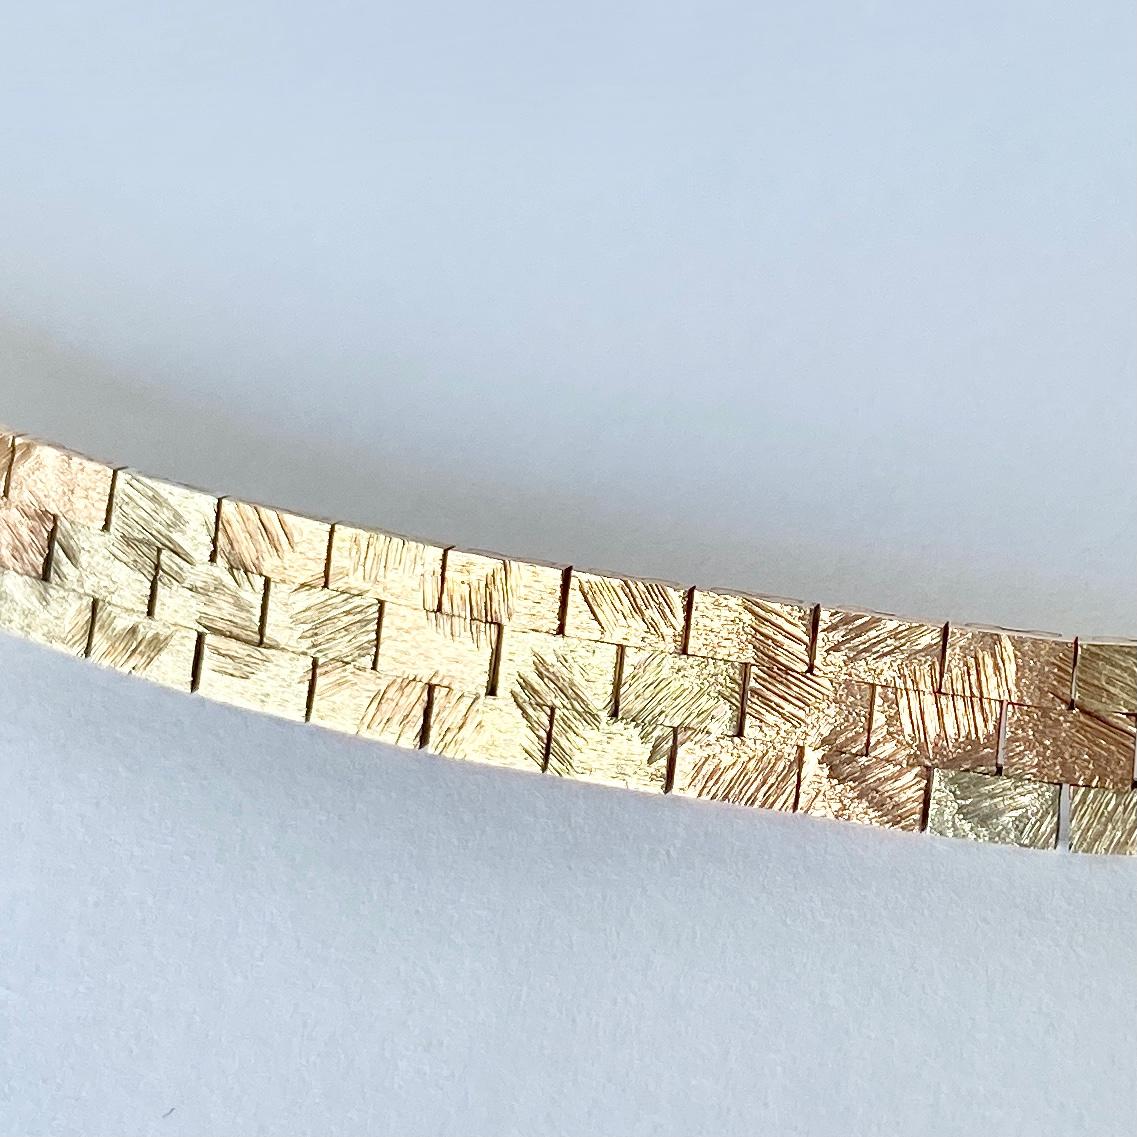 This beautiful vintage textured 9ct gold collar is flat and sits beautifully. It is fastened using a simple sliding clasp.

Length: 41.2cm
Chain Width: 7.5mm 

Weight: 39.1g